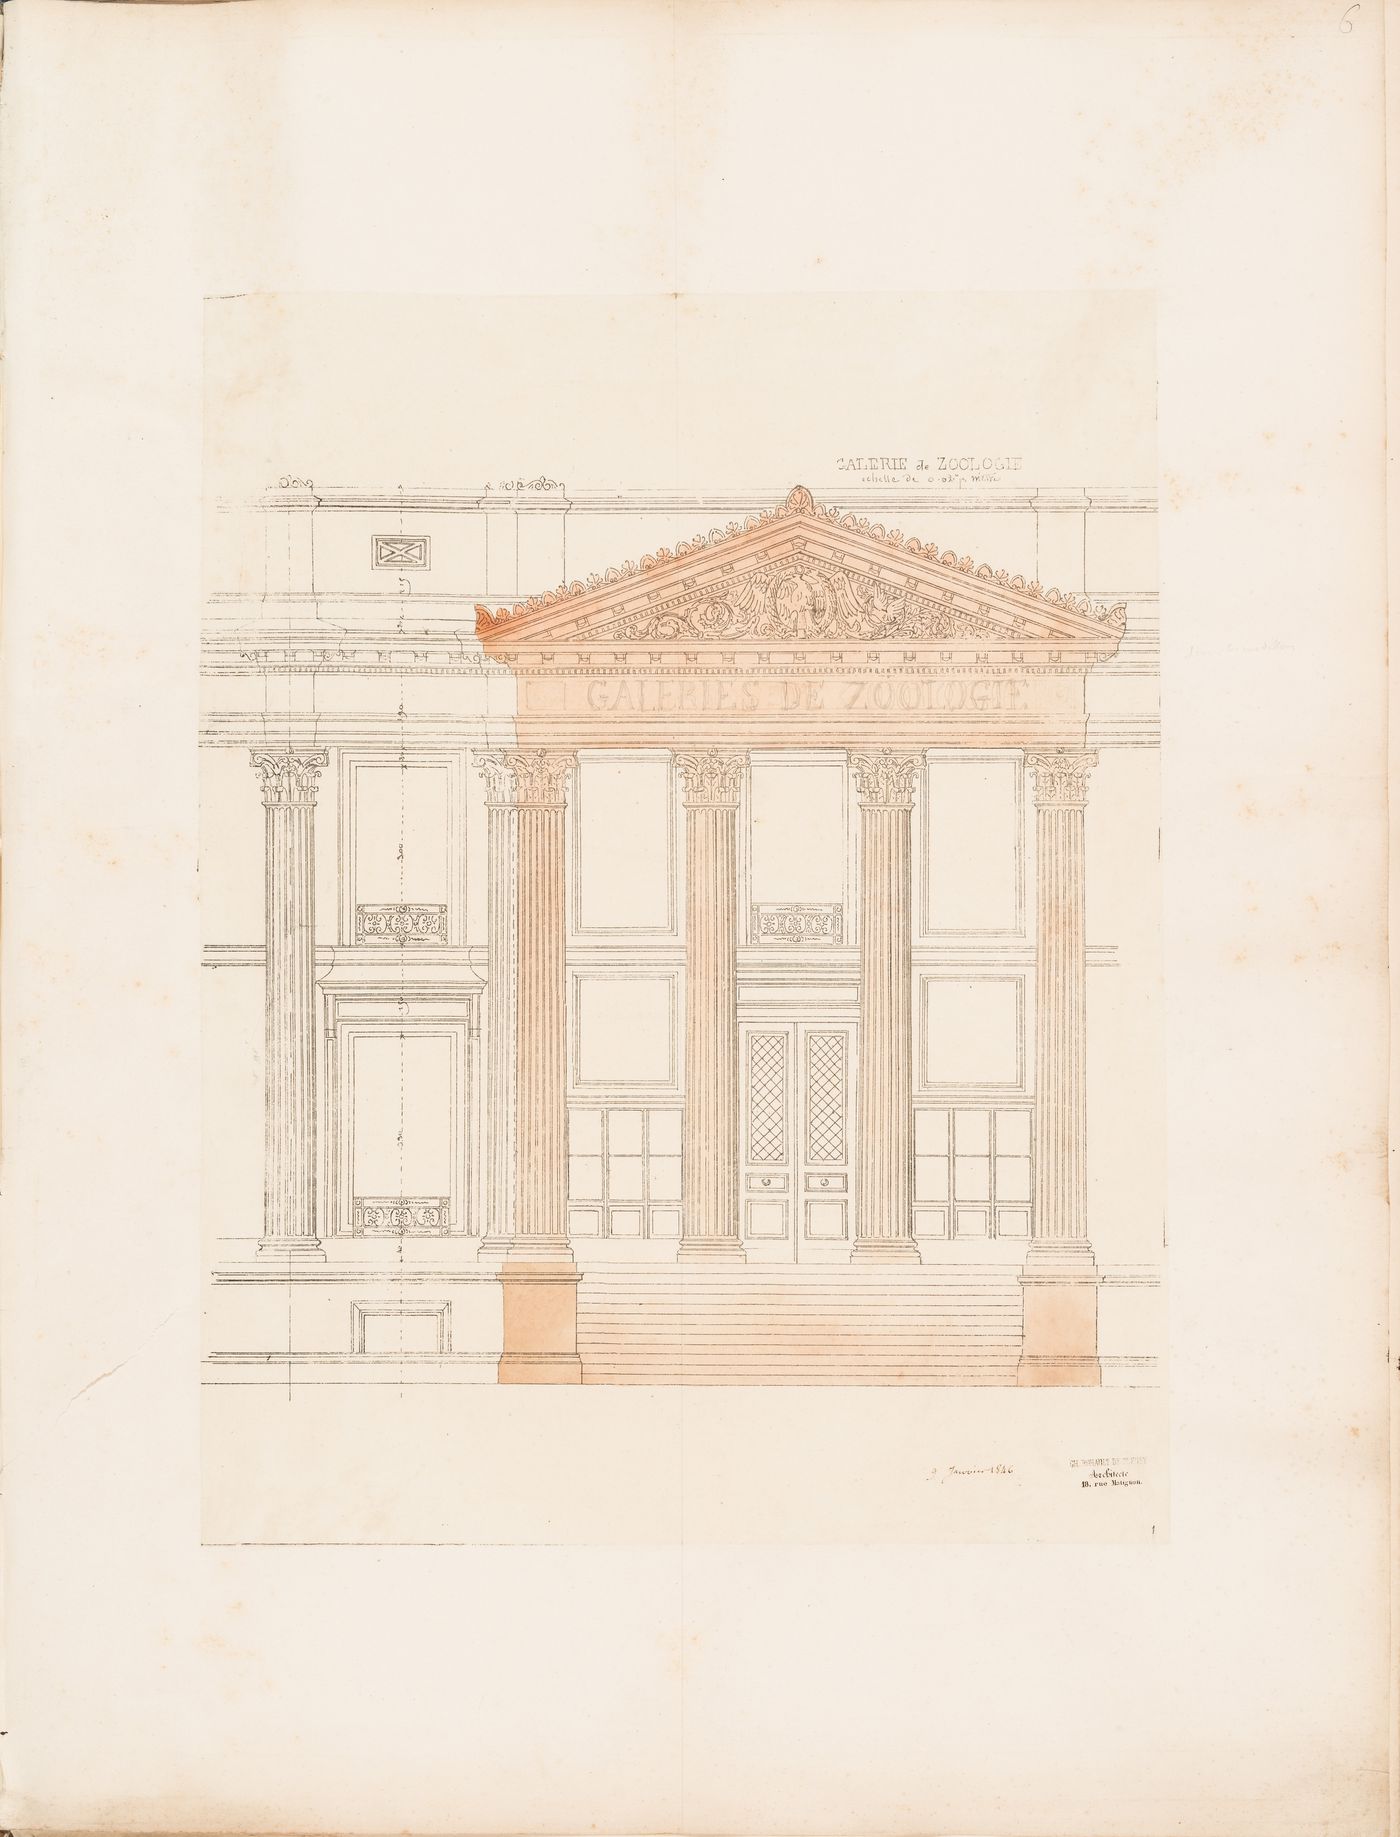 Project for a Galerie de zoologie, 1846: Partial elevation showing the entrance portico